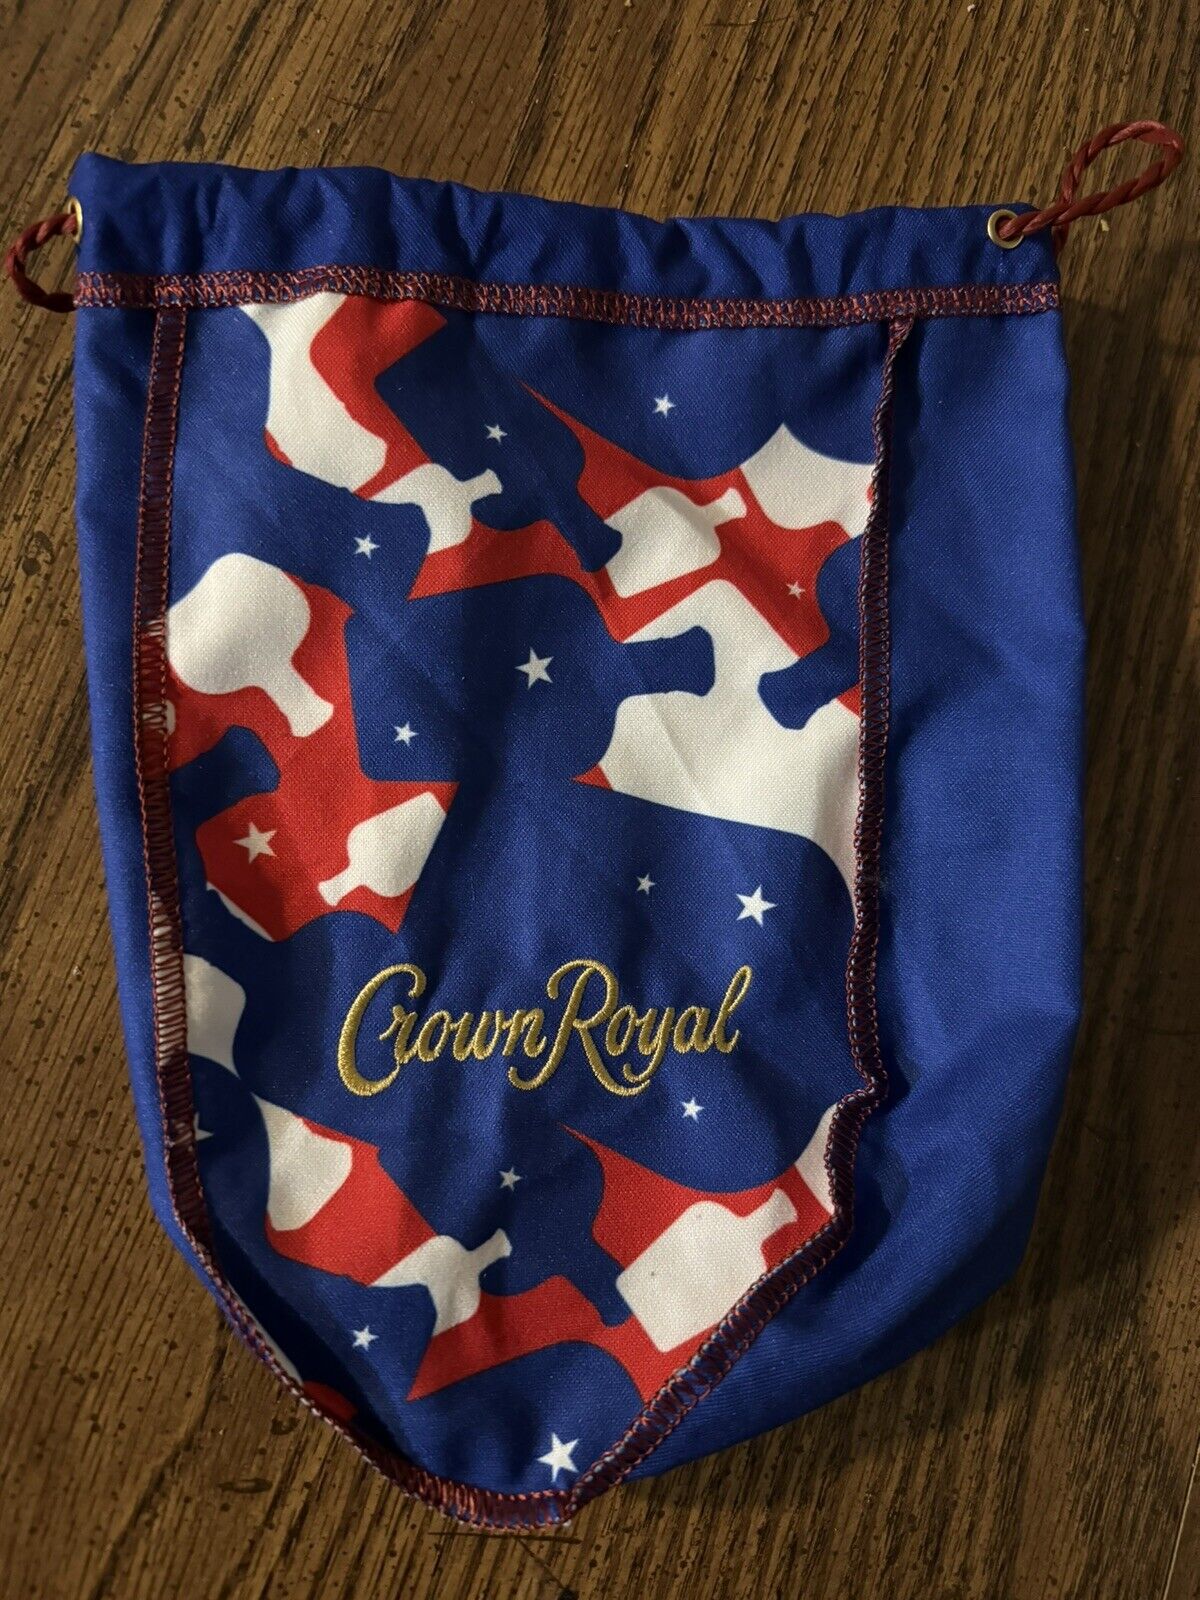 2 Rare Limited Crown Royal Red White & Blue Camouflage Bags